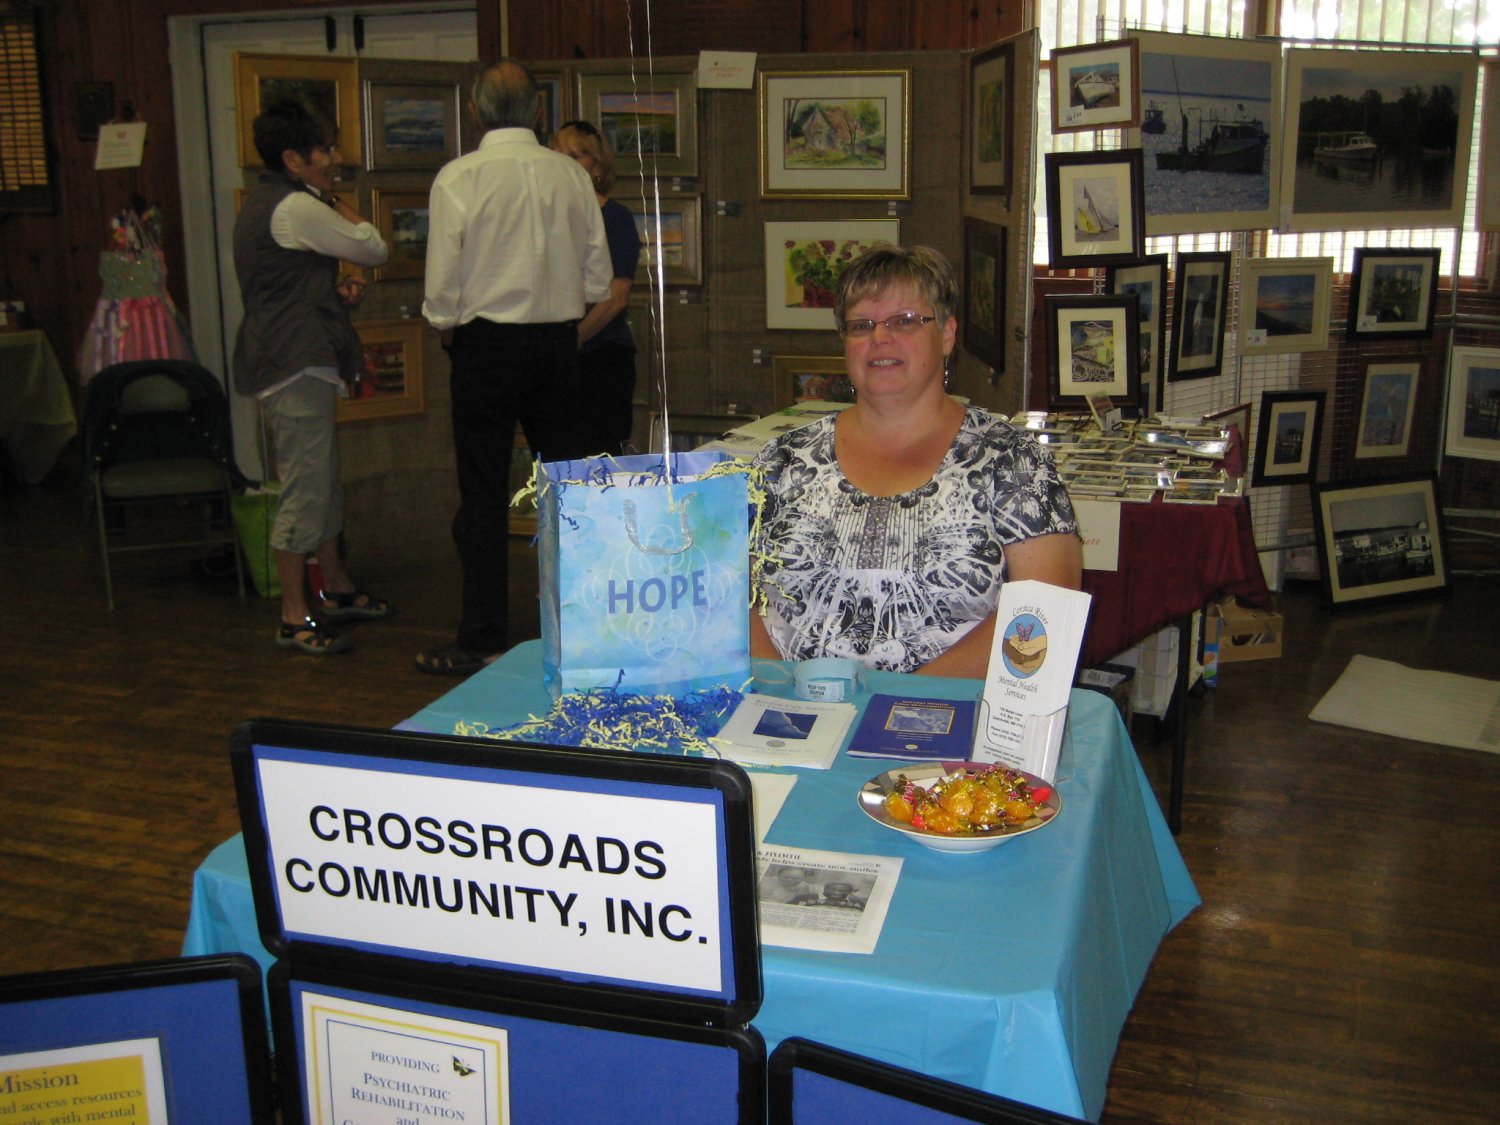  Missy Rhodes, representative of Crossroads Community, Inc., the beneficiary of the Artisan's Fair.  